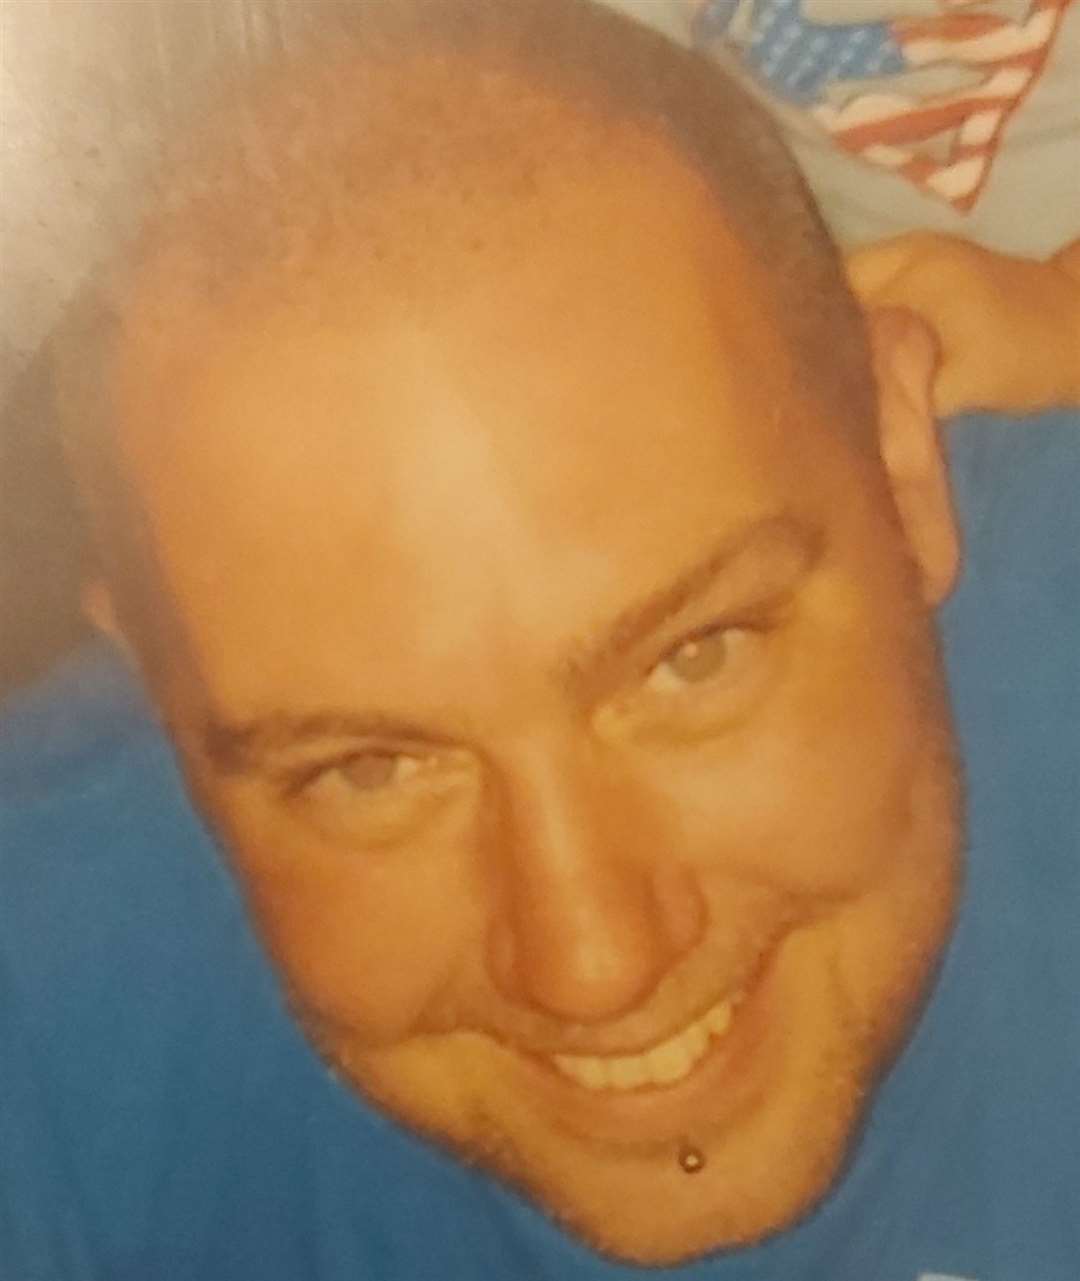 Scott Varney had been reported missing. Picture: Kent Police